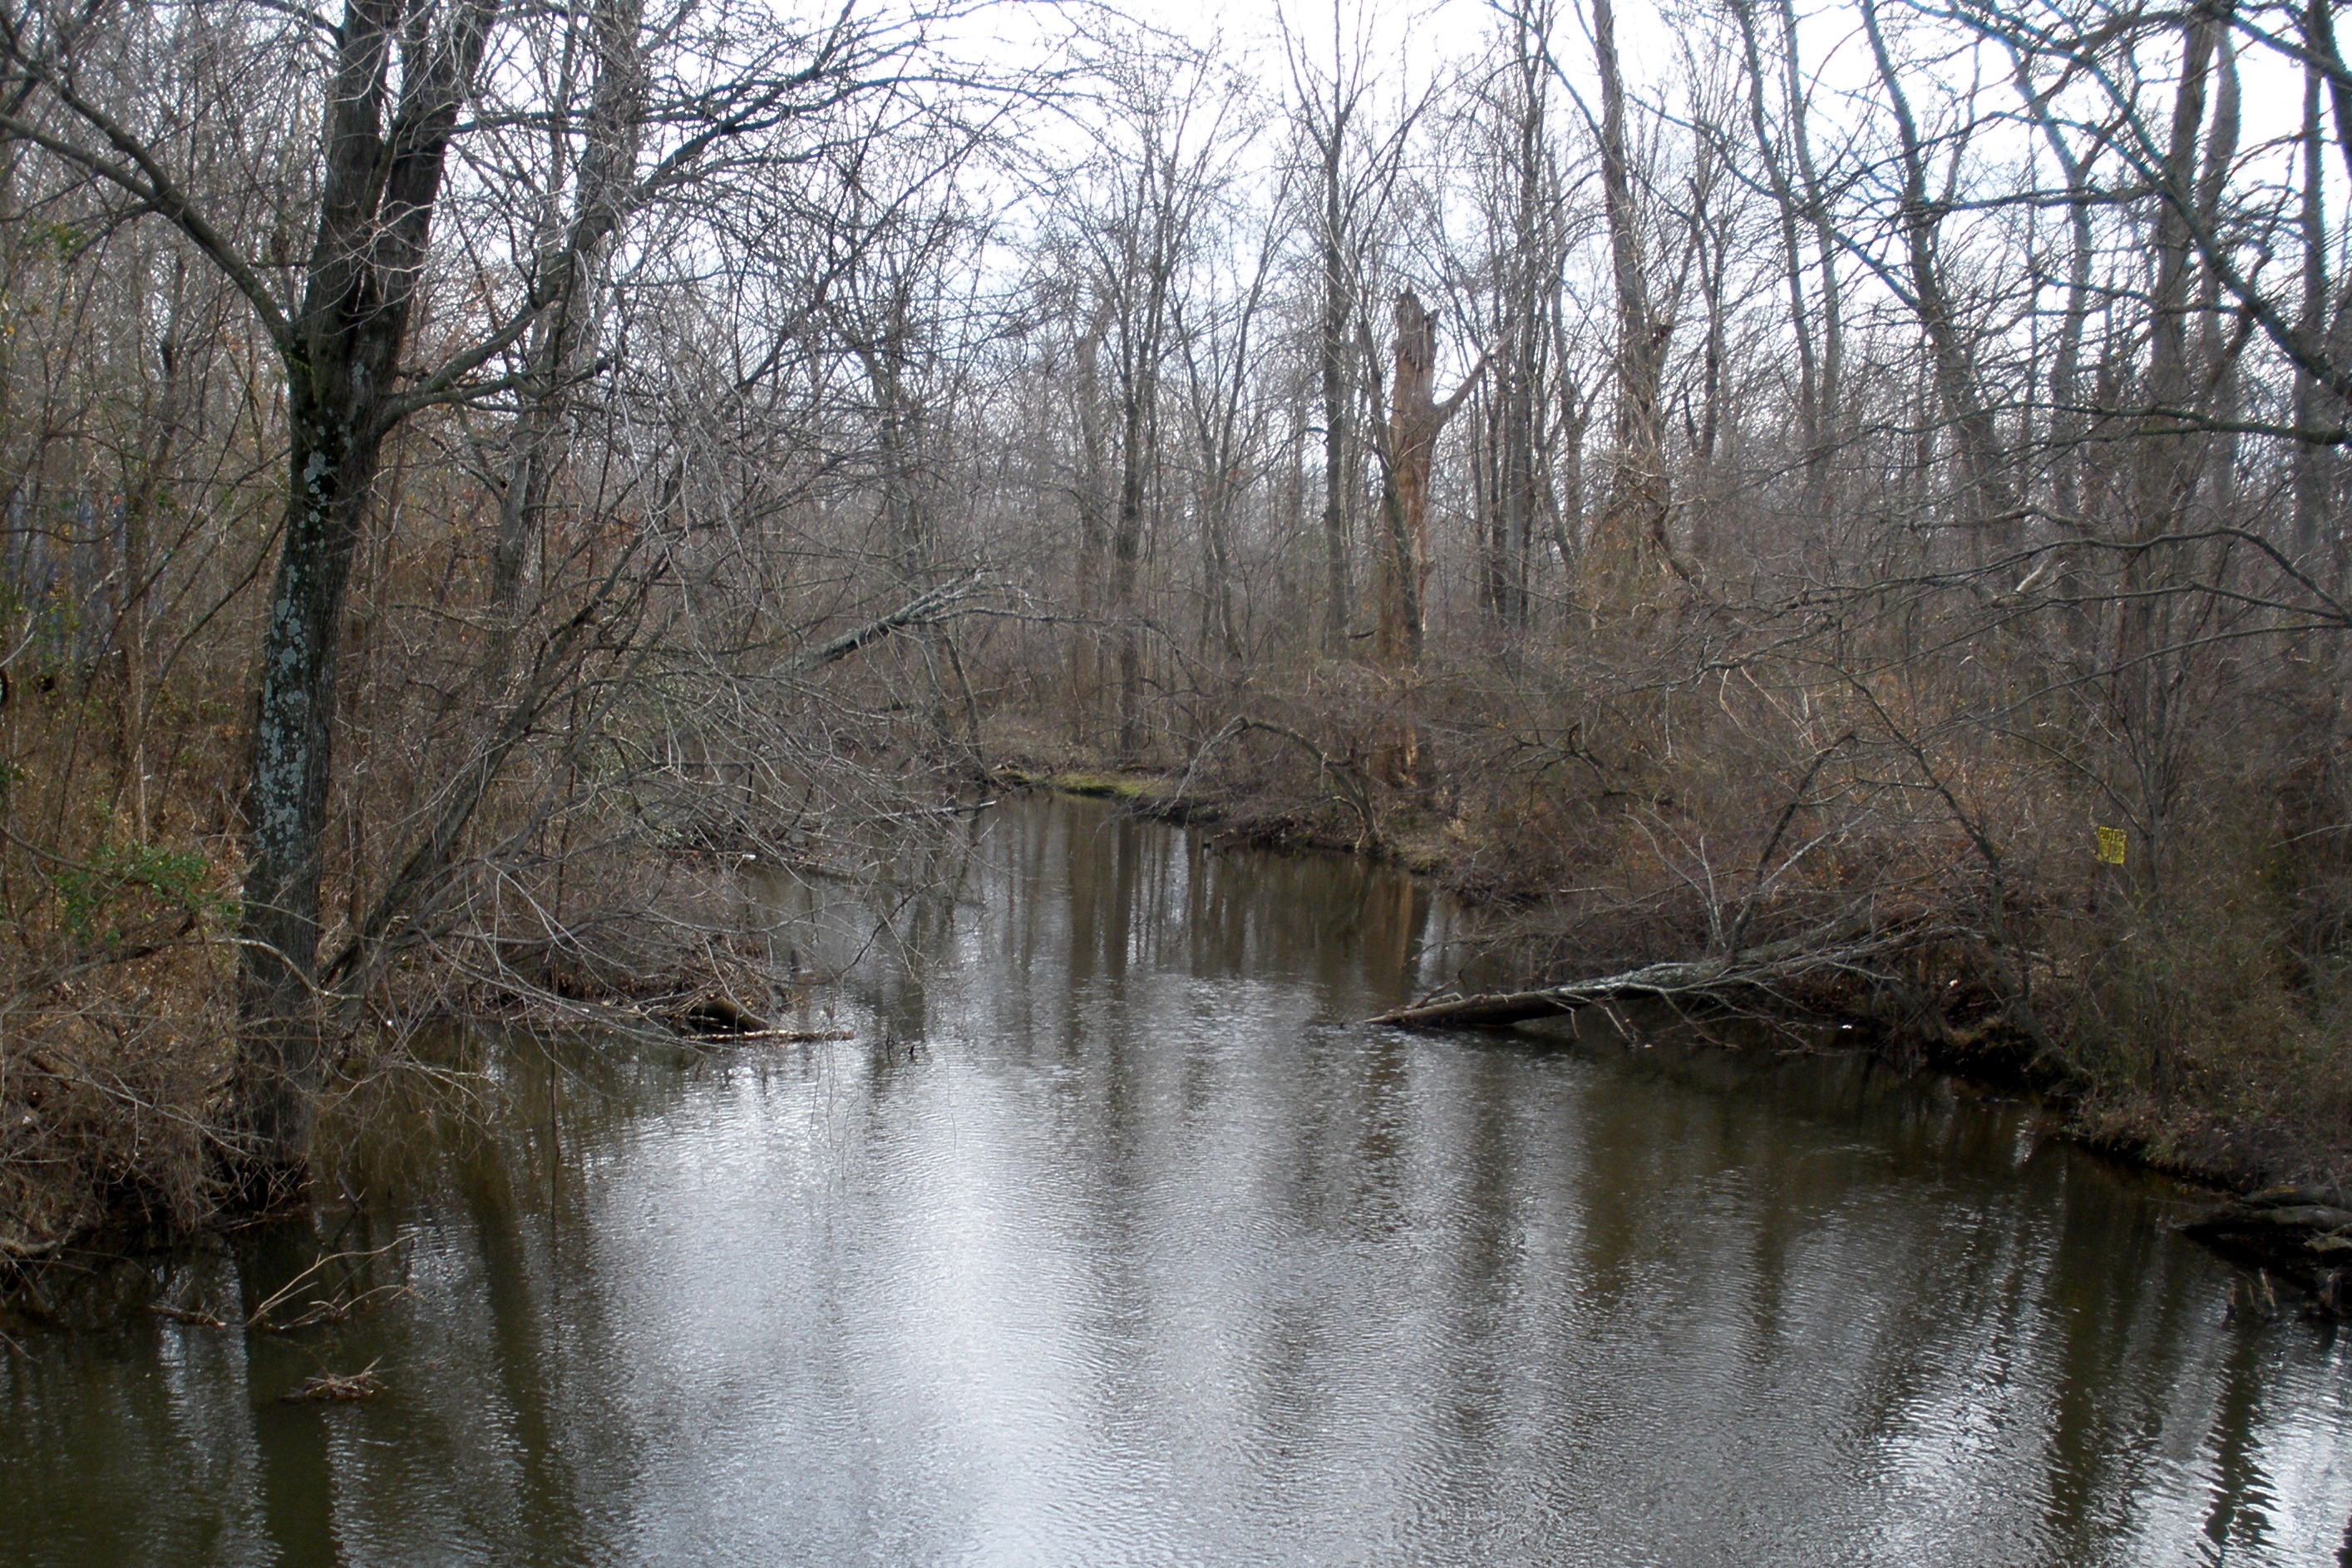 Main Channel of the Chickahominy River at Mechanicsville